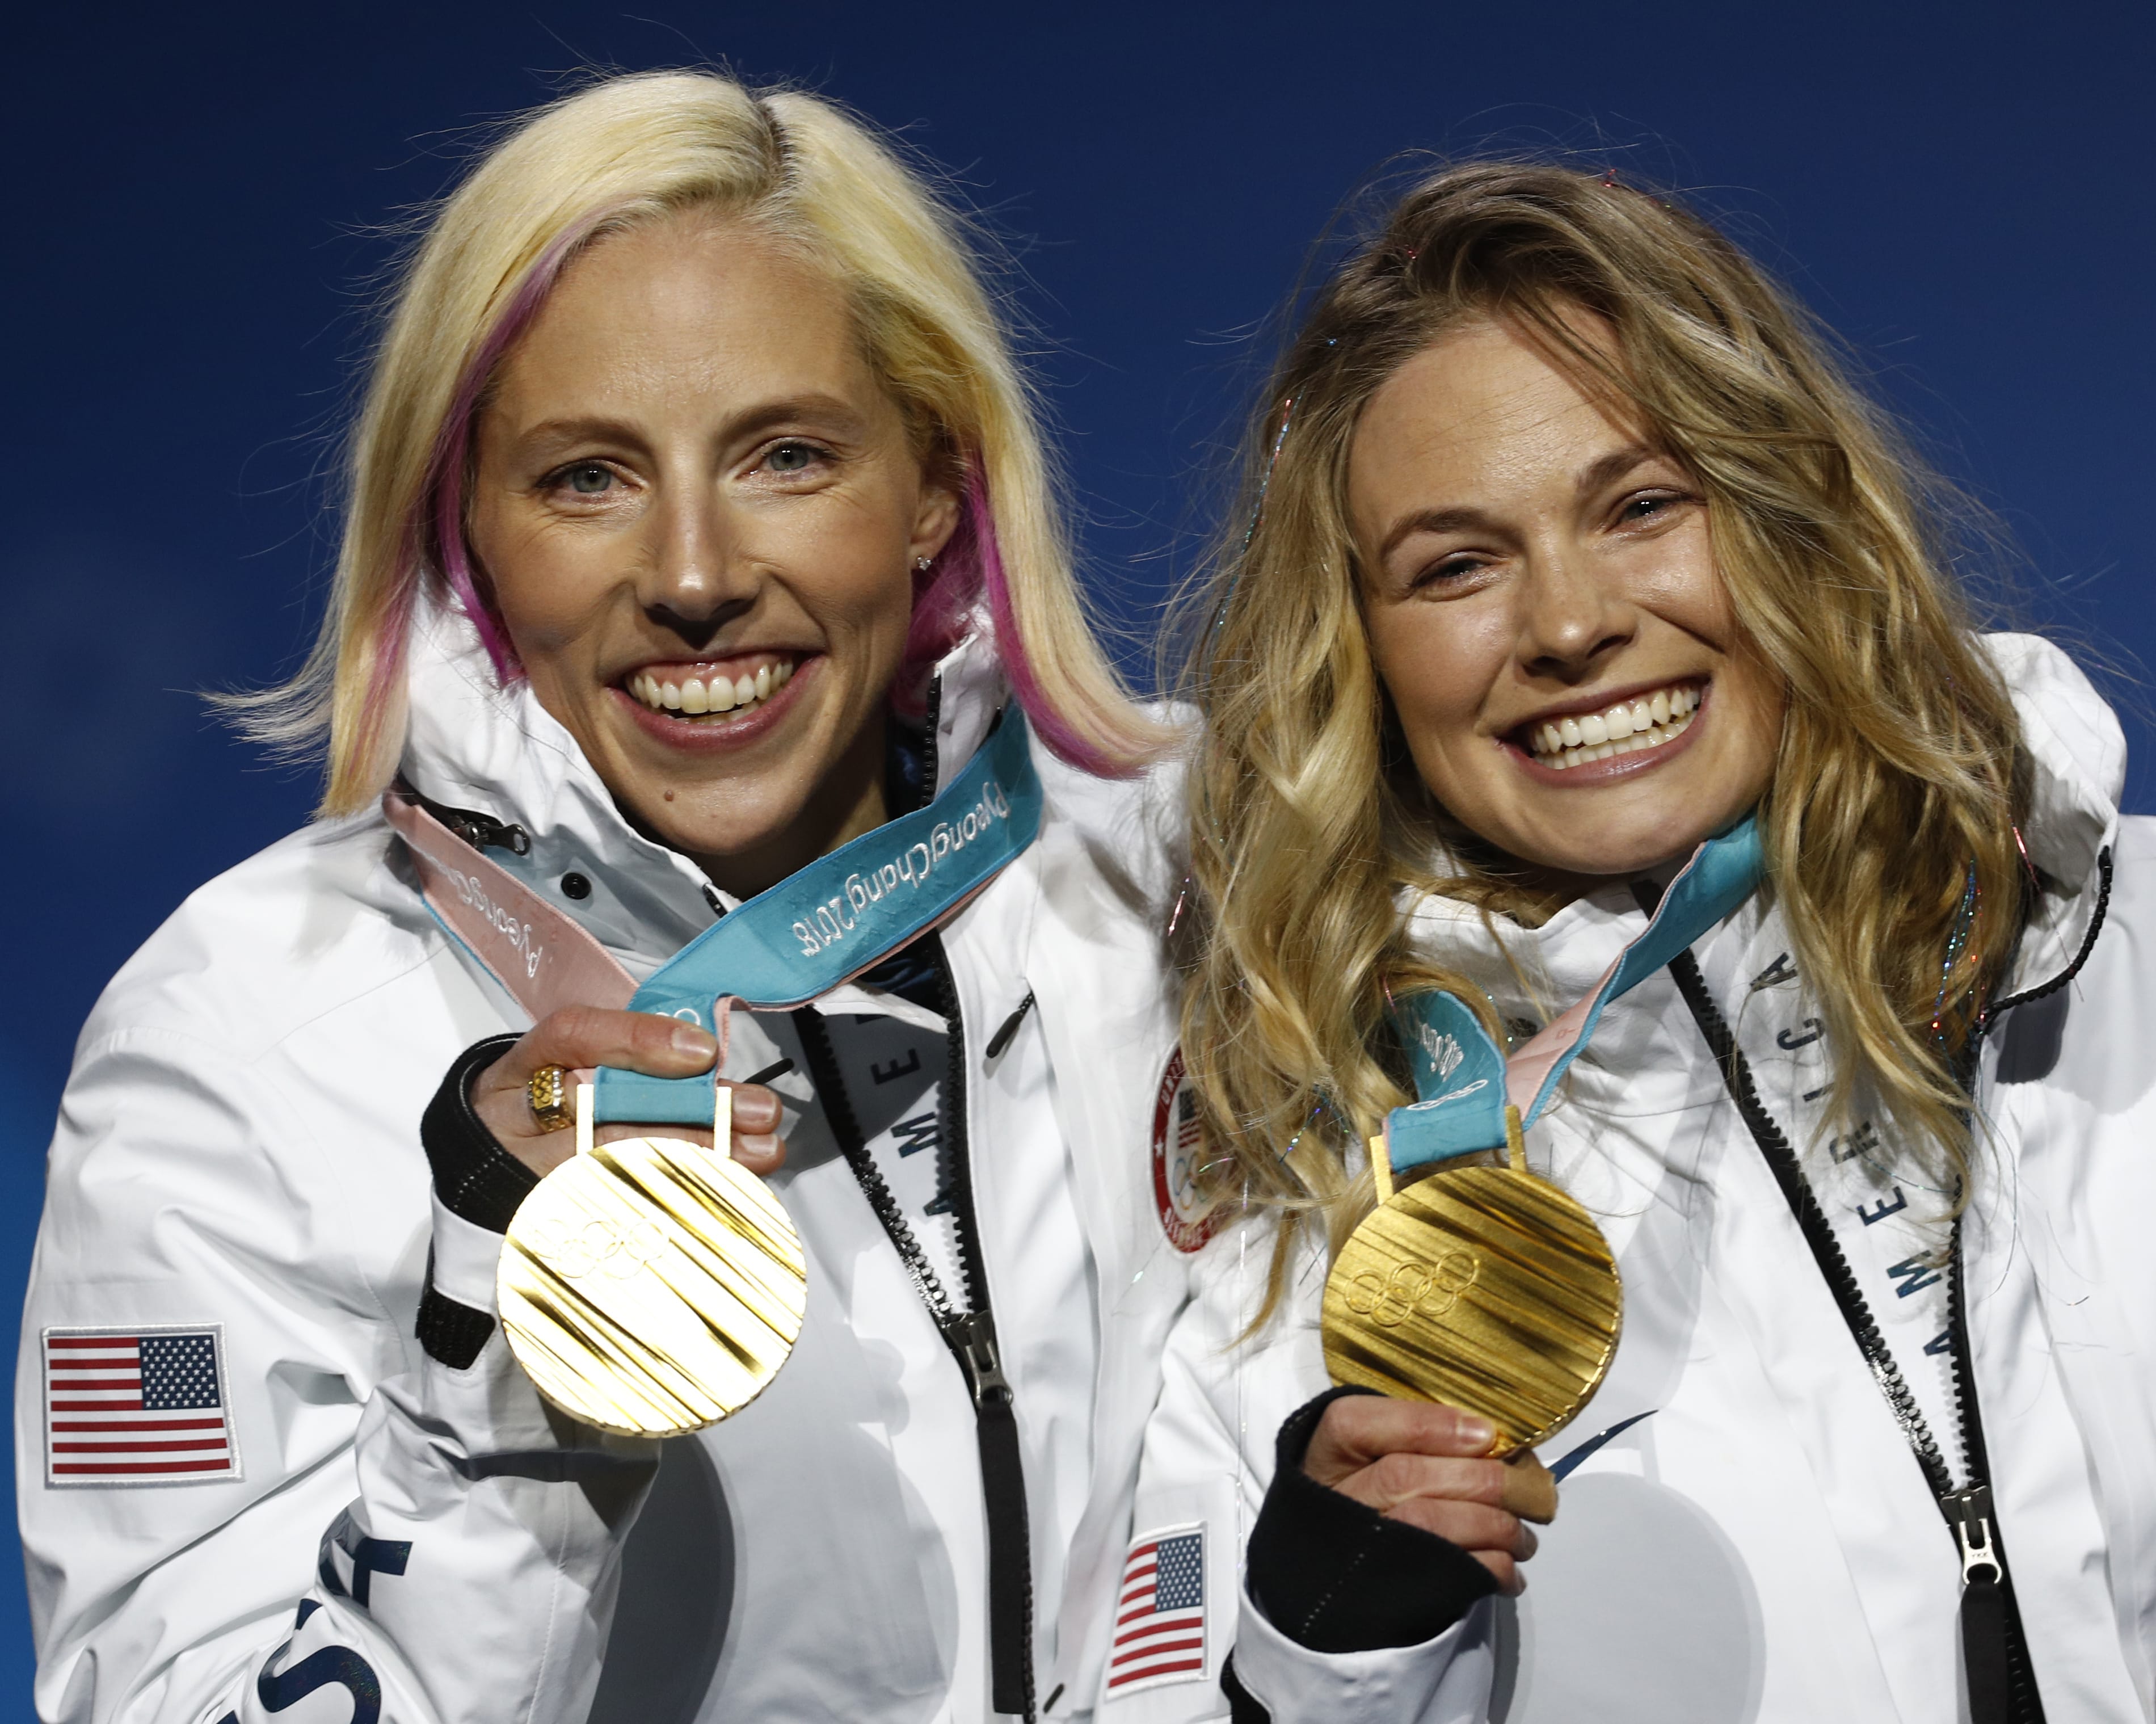 Gold medalists in the women's team sprint freestyle cross-country skiing Kikkan Randall and Jessica Diggins, of the United States, pose during the medals ceremony at the 2018 Winter Olympics in Pyeongchang, South Korea, Thursday, Feb. 22, 2018.